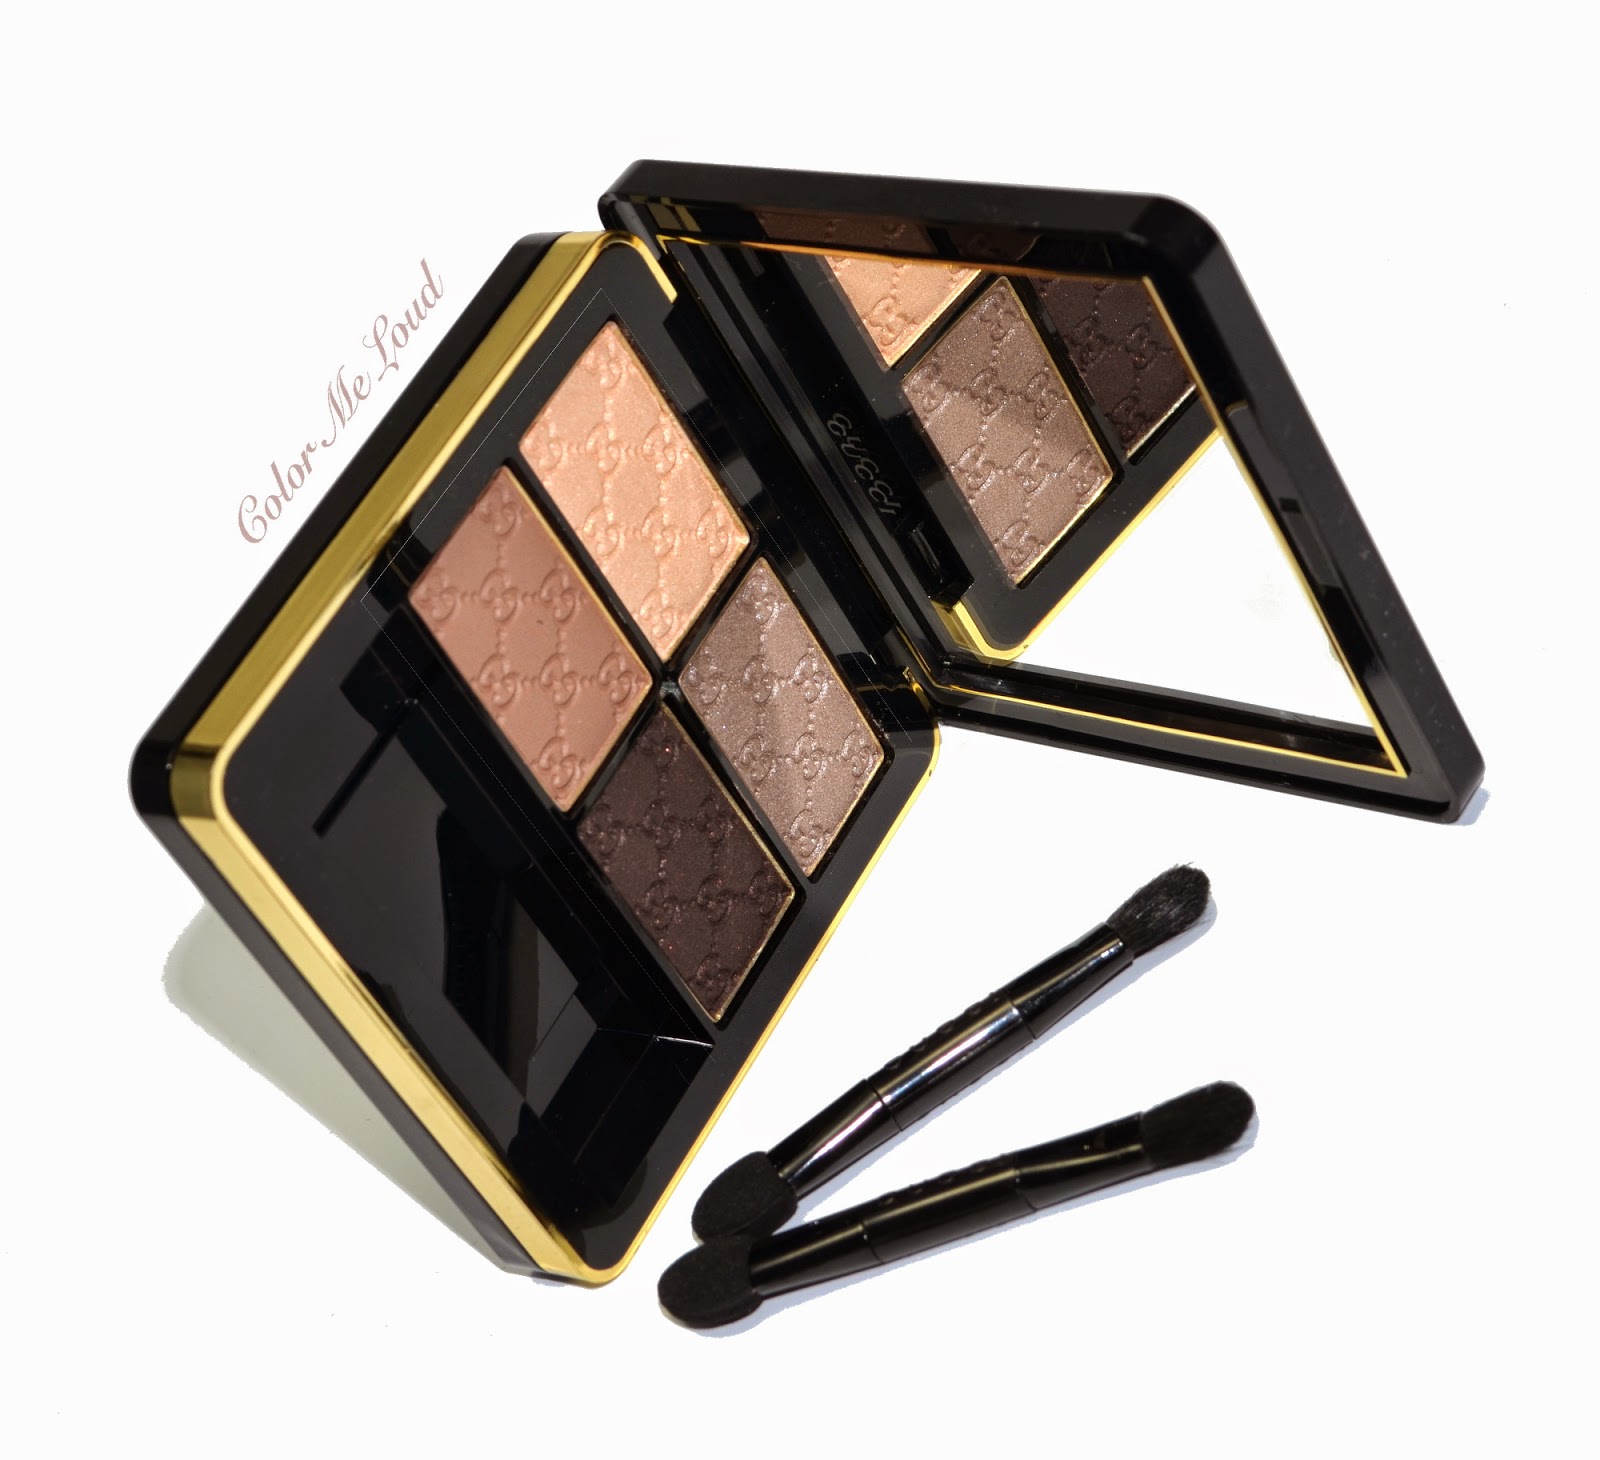 Gucci Magnetic Color Shadow Quad #020 Tuscan Storm for Fall 2014